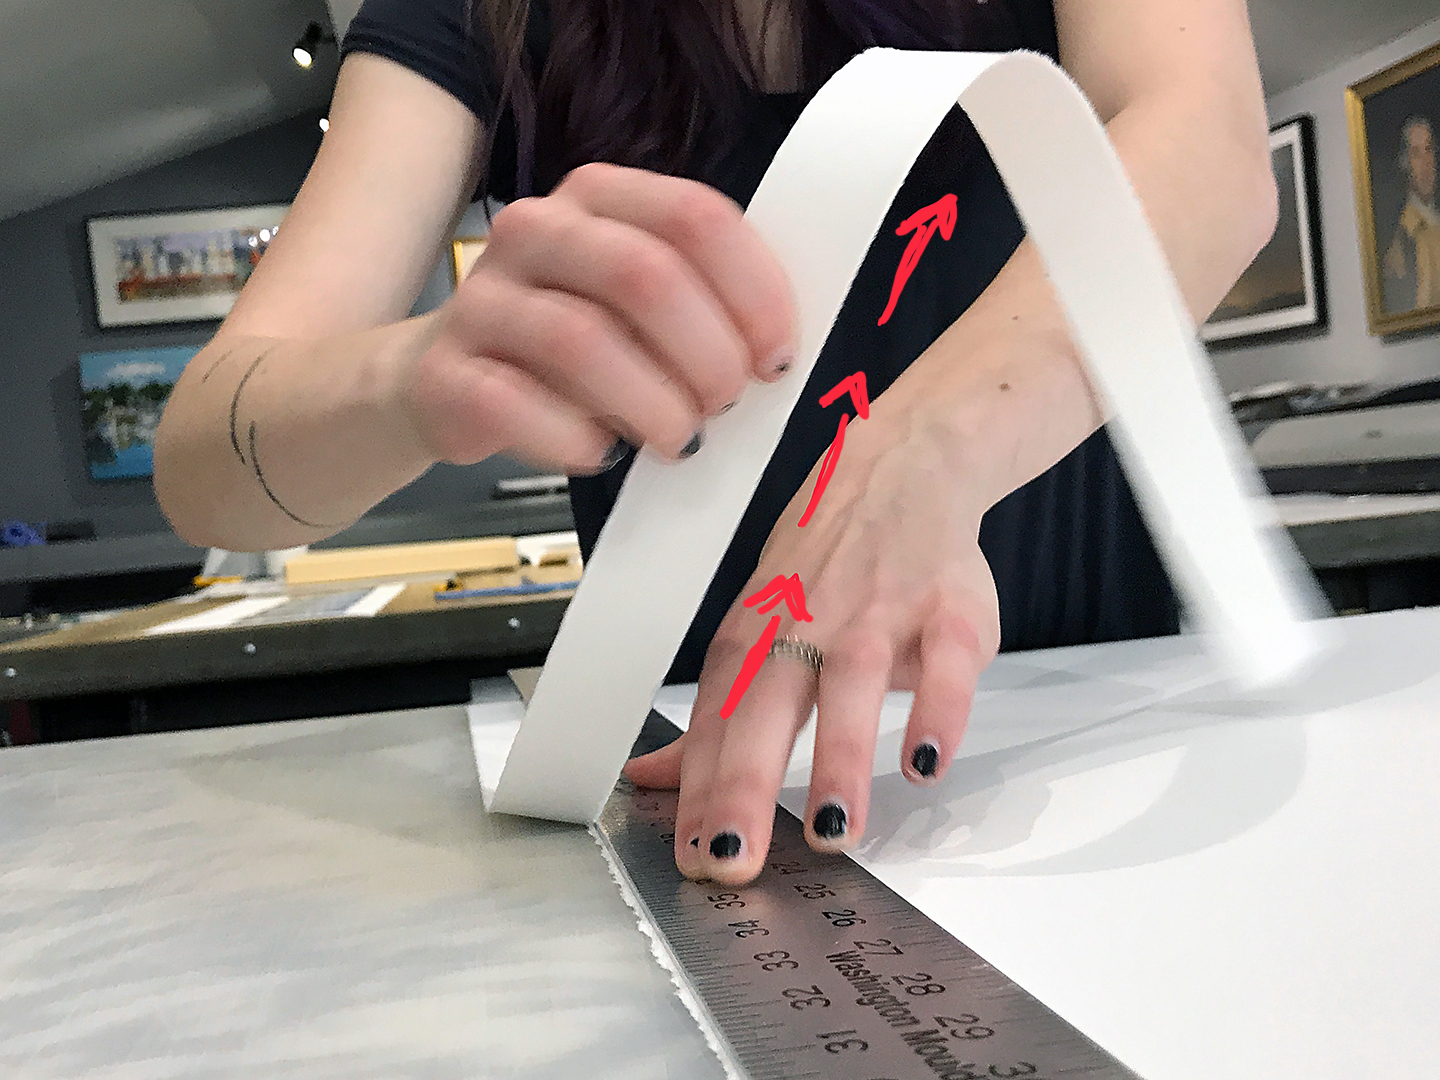 The process of hand tearing prints along a ruler